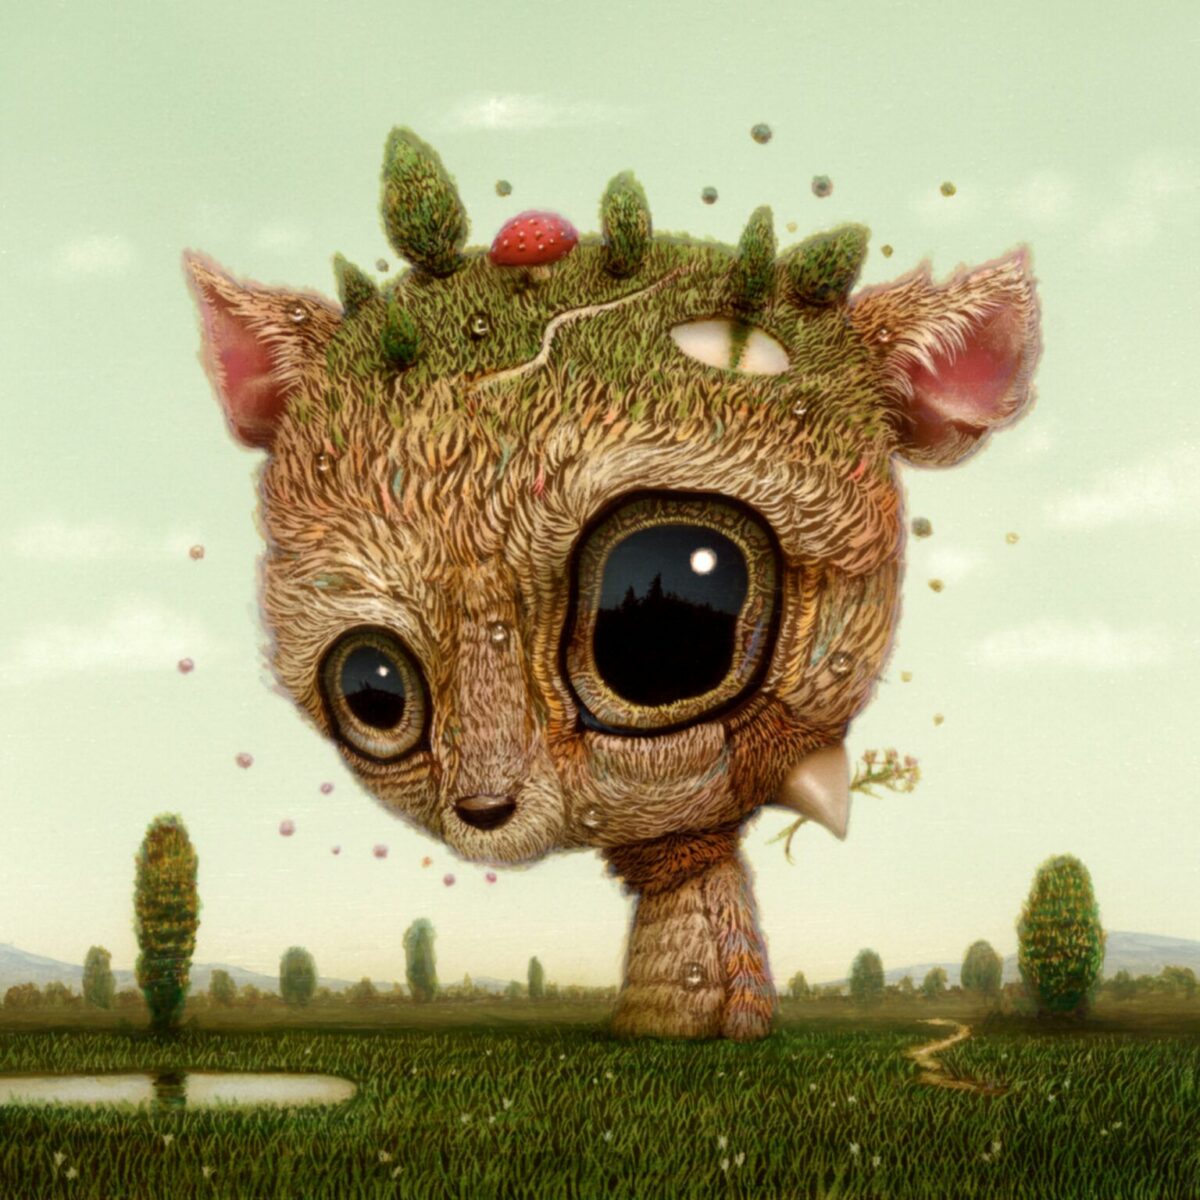 Quirky Fantastical Creatures With Oversized Eyes By Haoto Nattori 10